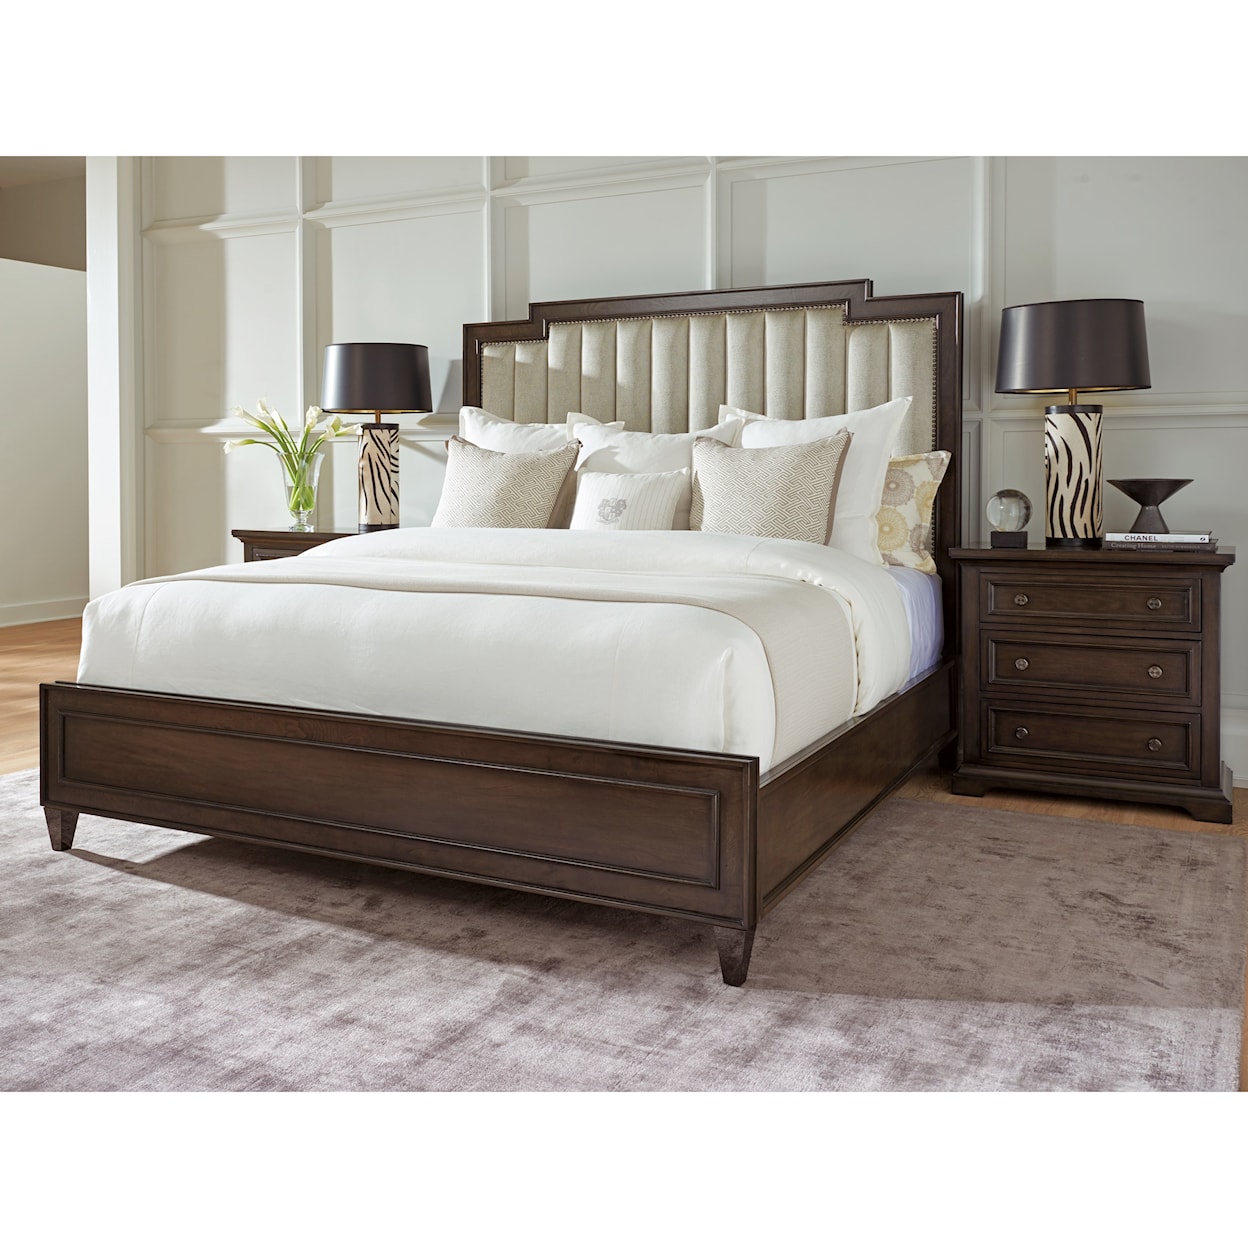 Barclay Butera Brentwood Queen Bedroom Group